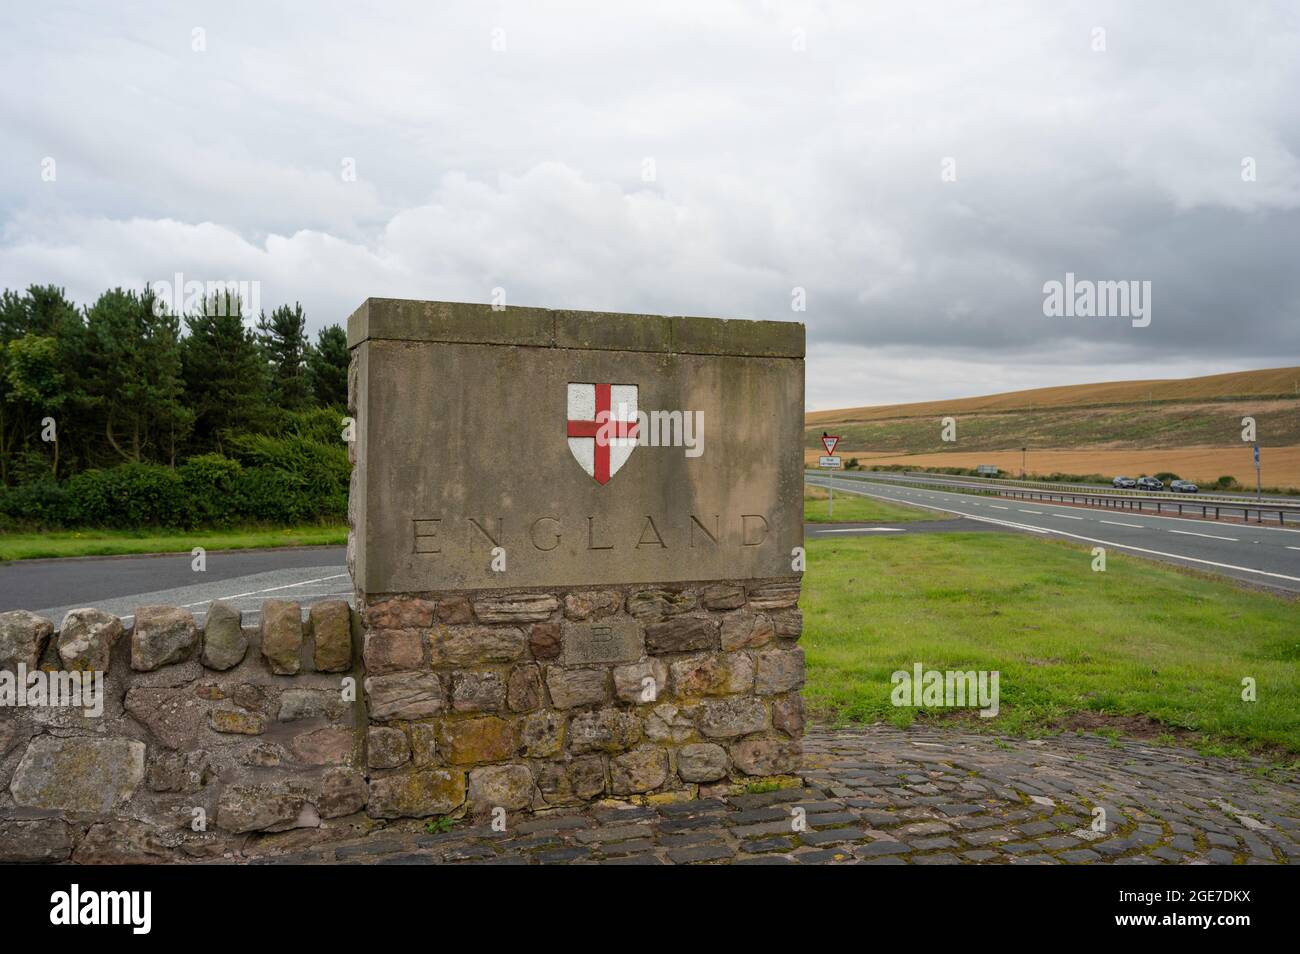 Stone England sign with St Georges cross at border with Scotland on A1 road. Background of road and greenery. No people. Stock Photo